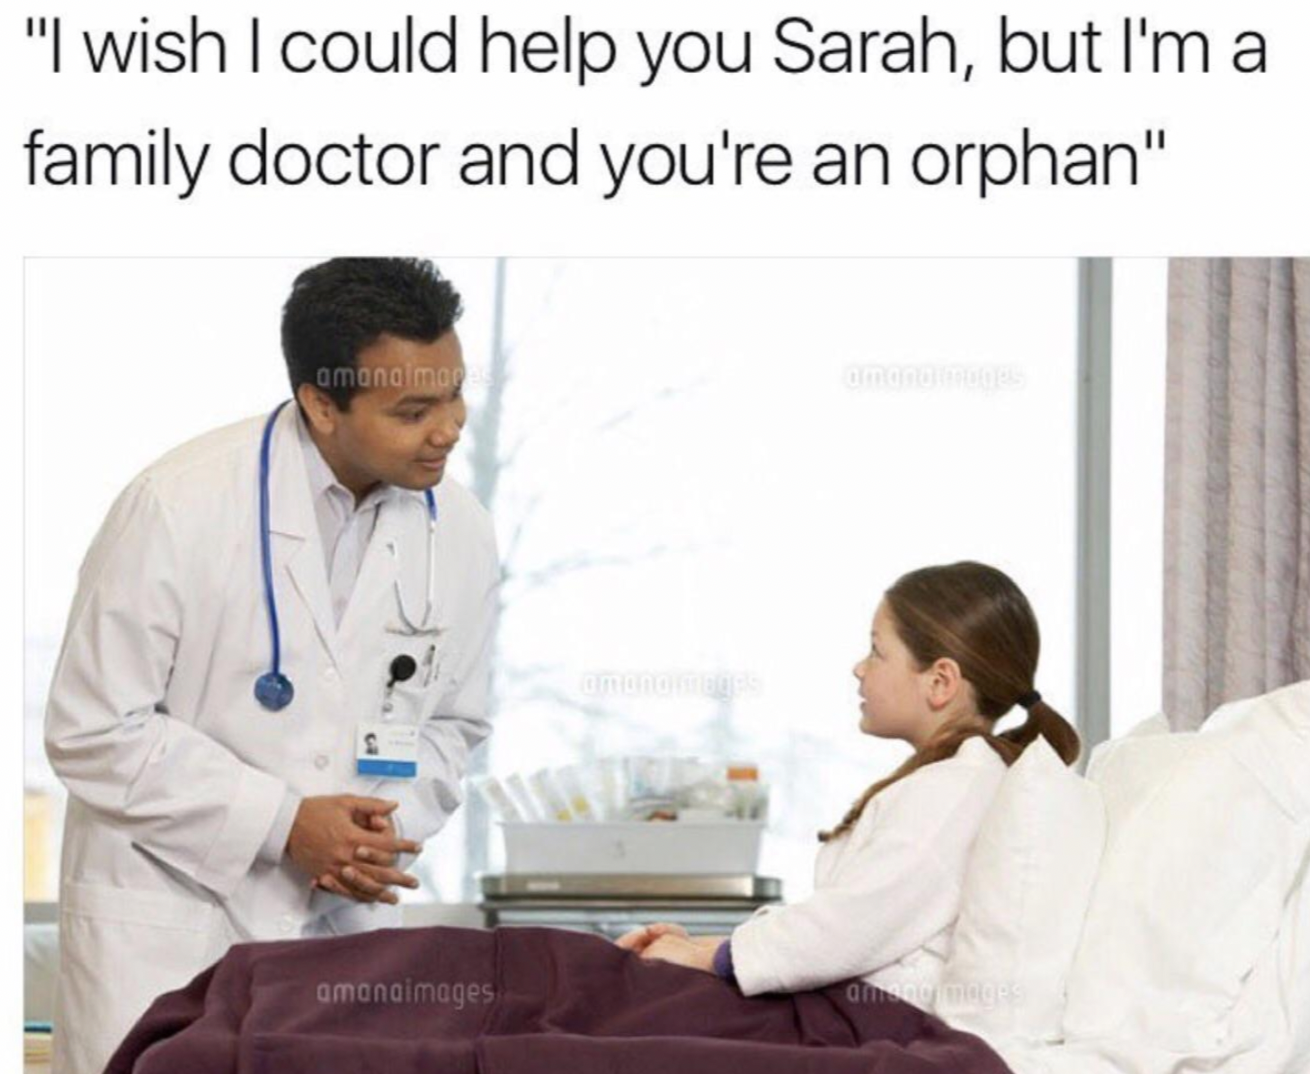 doctor memes funny - "I wish I could help you Sarah, but I'm a family doctor and you're an orphan" amang man amanaimages